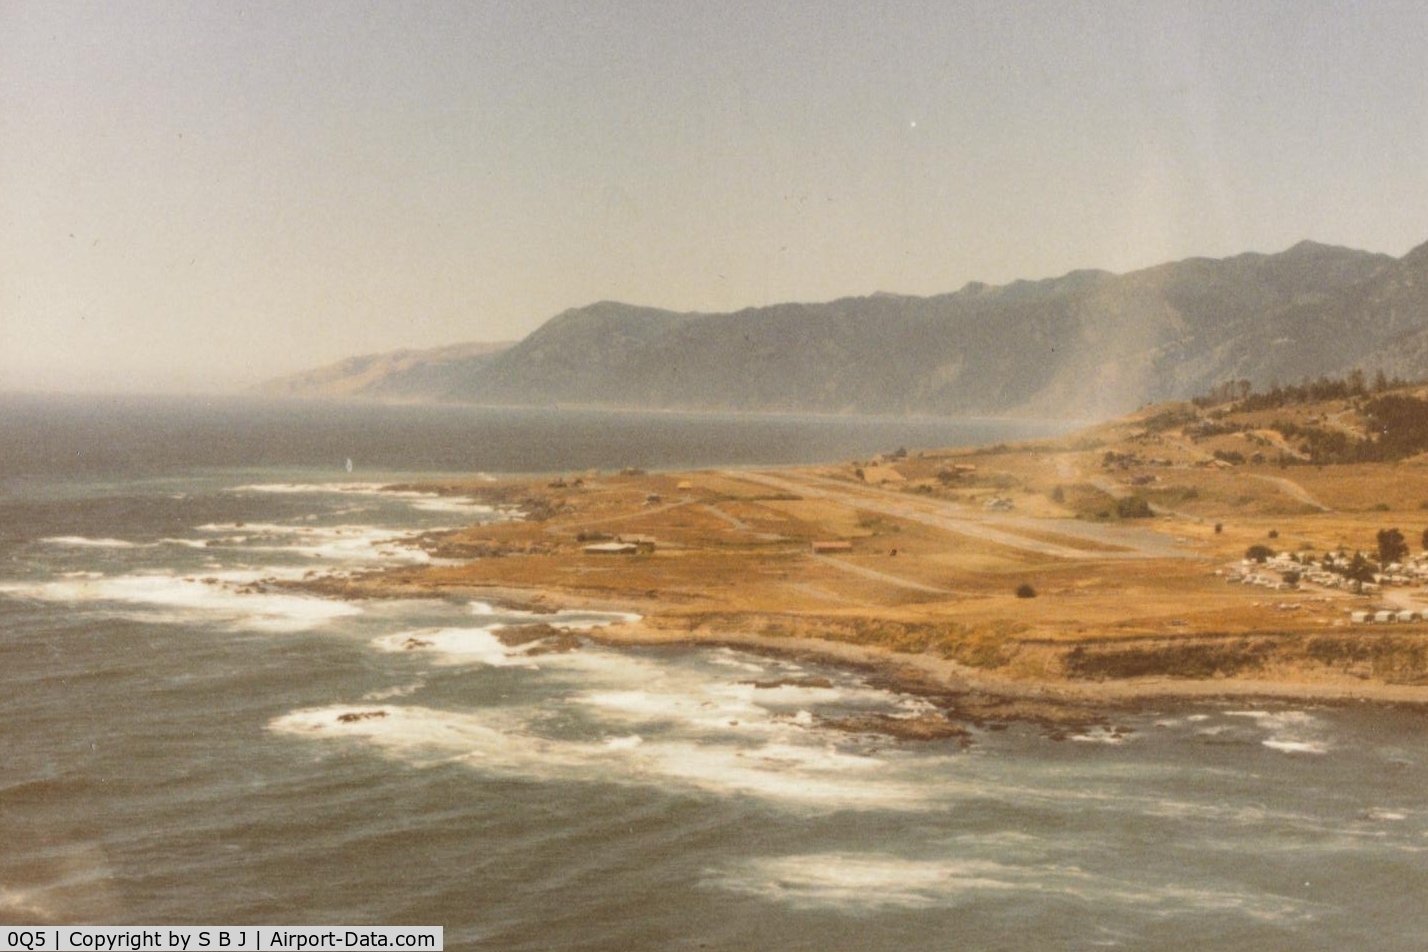 Shelter Cove Airport (0Q5) - Passing by Shelter Cove on a windy day in 1982. Big Flat (seen in 2 of my N8059X pictures) is in the top left of pic where the dark part of the mountain range ends.It is now Kings Range National Conservation Area known as The Lost Coast.